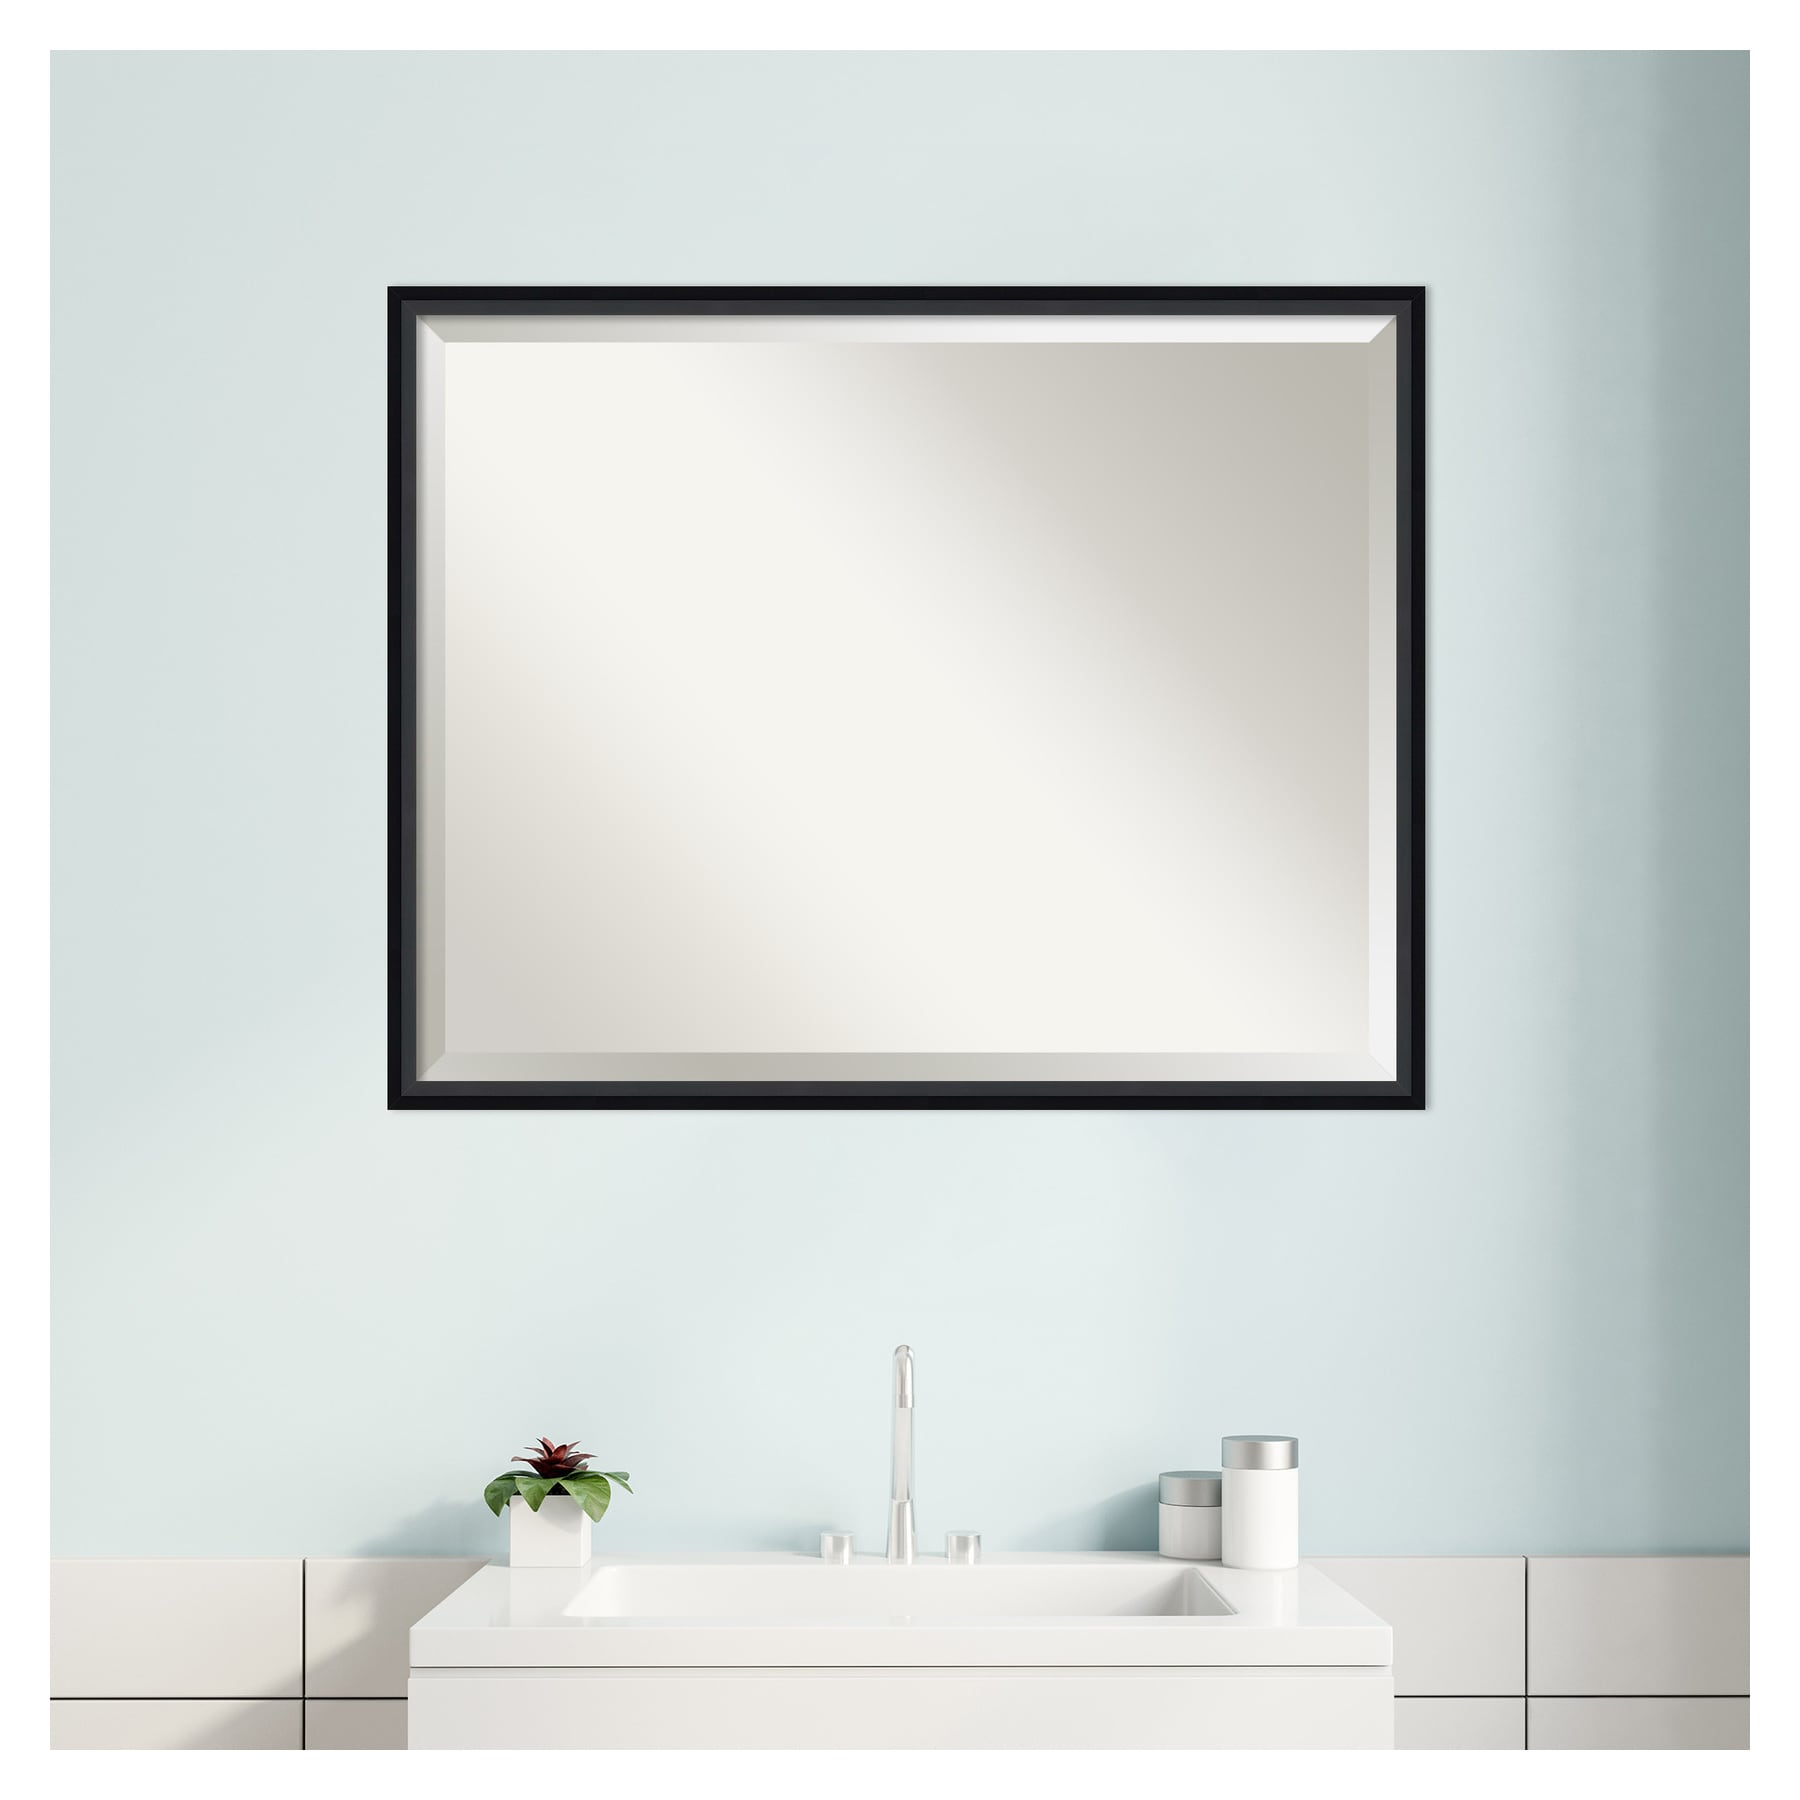 Amanti Art Lucie Black Frame Collection 29-in x 22-in Framed Bathroom ...